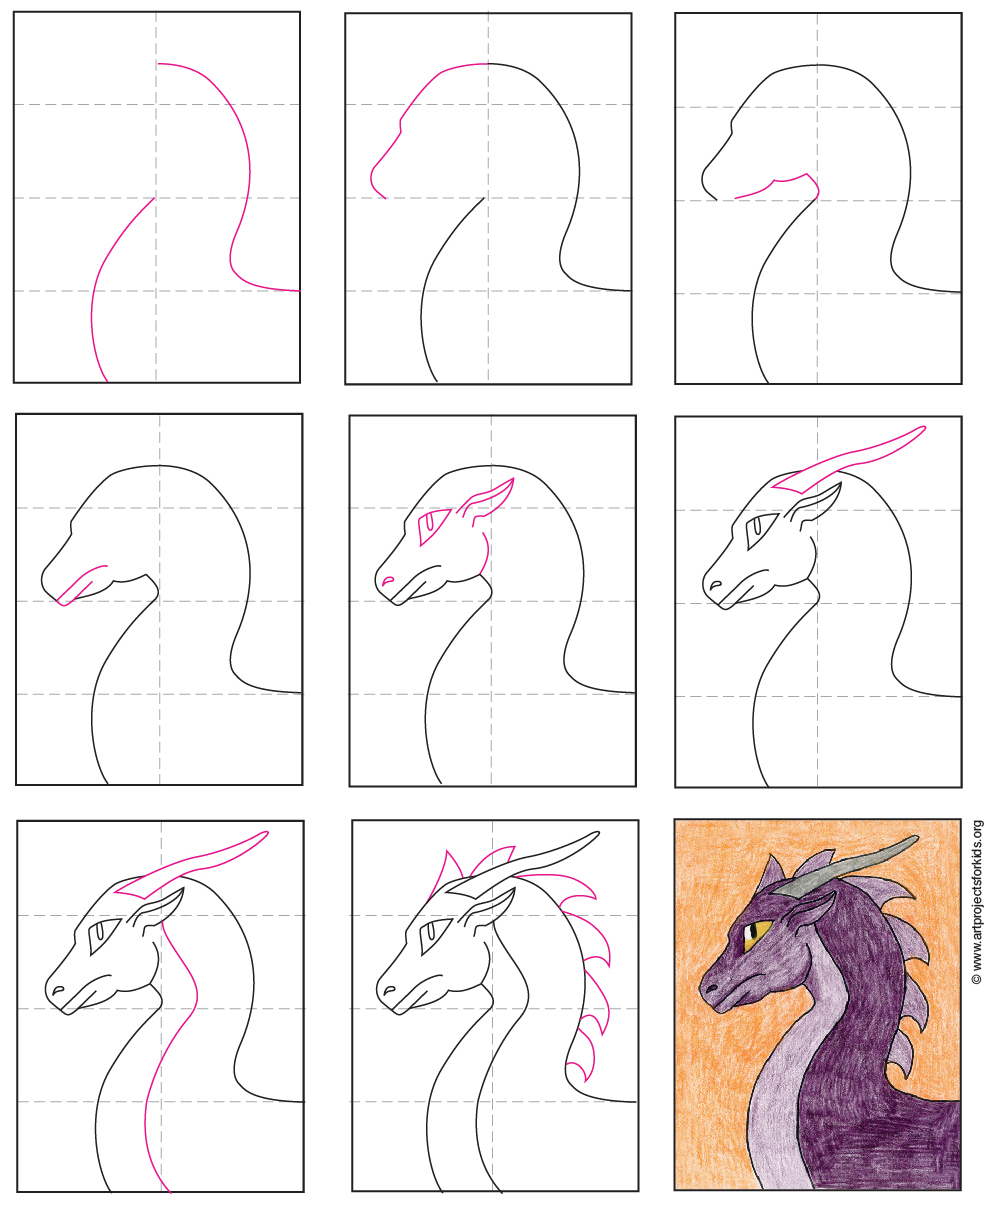  How To Draw A Dragons Head Step By Step in the world Learn more here 